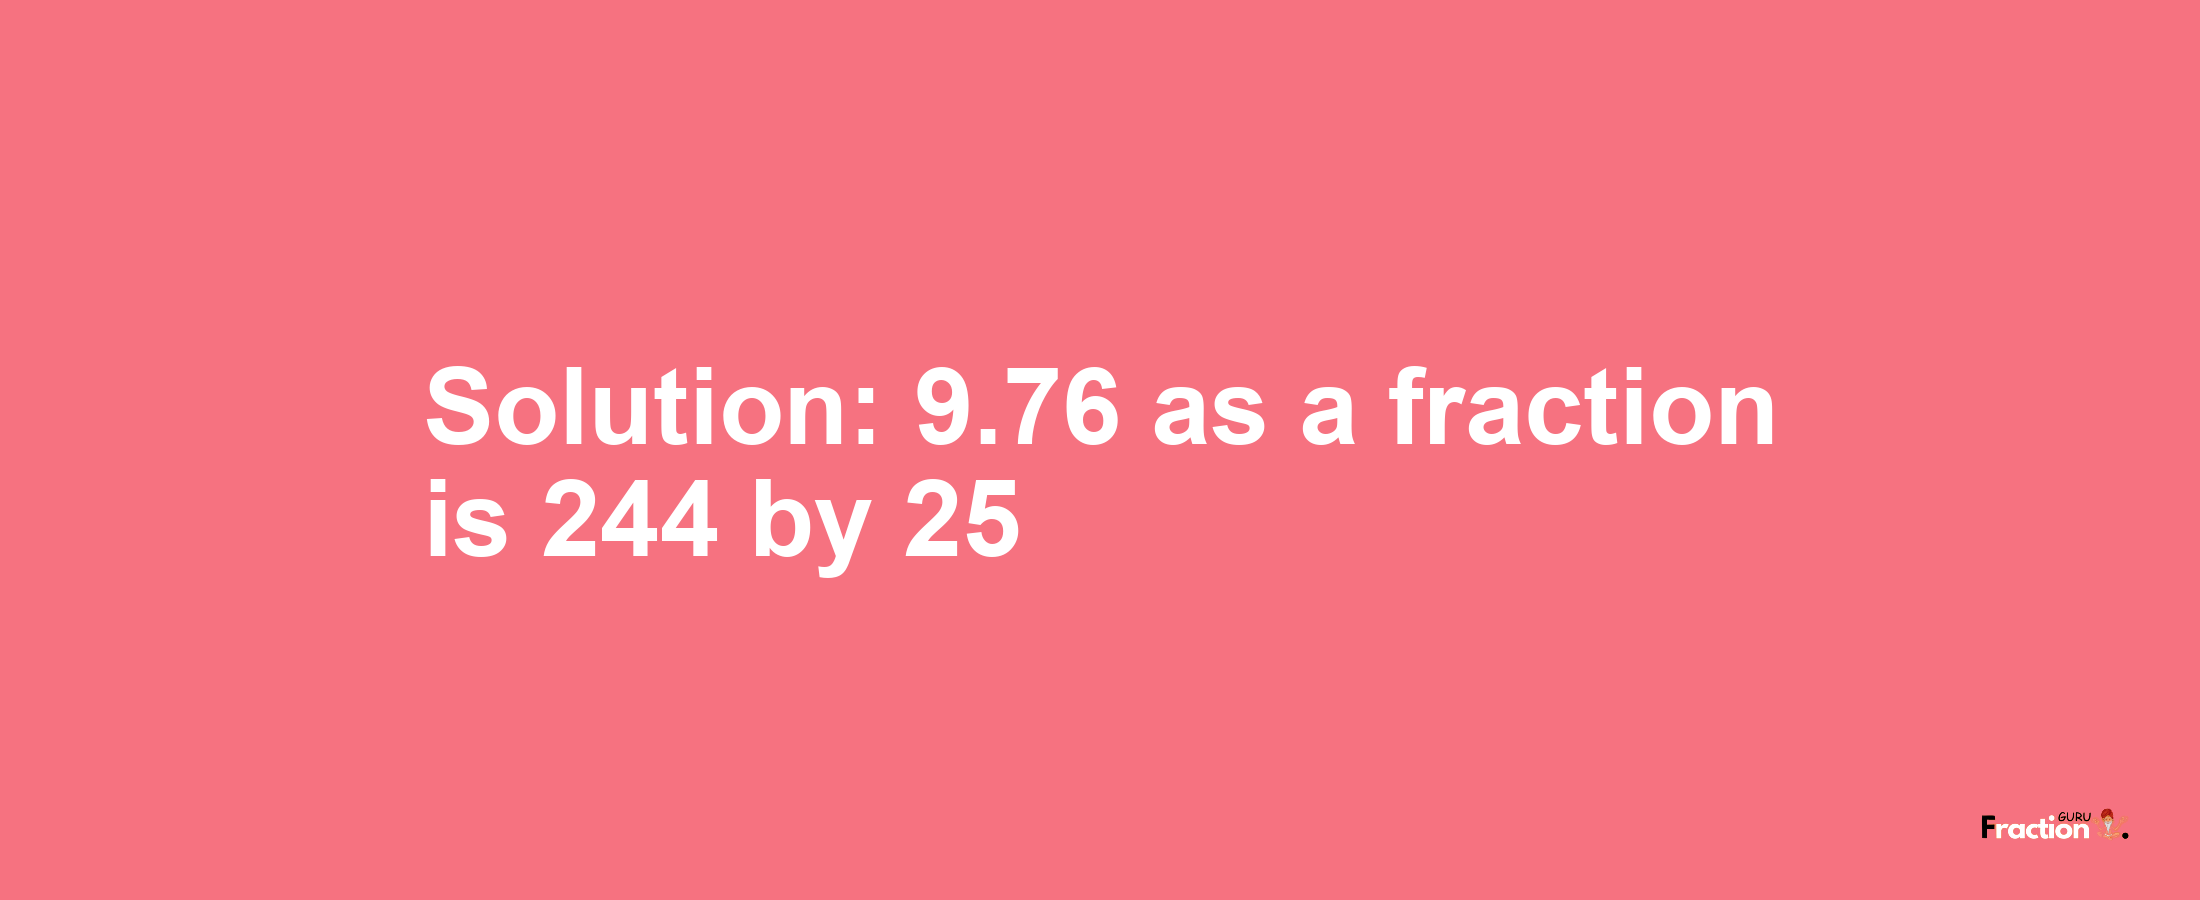 Solution:9.76 as a fraction is 244/25